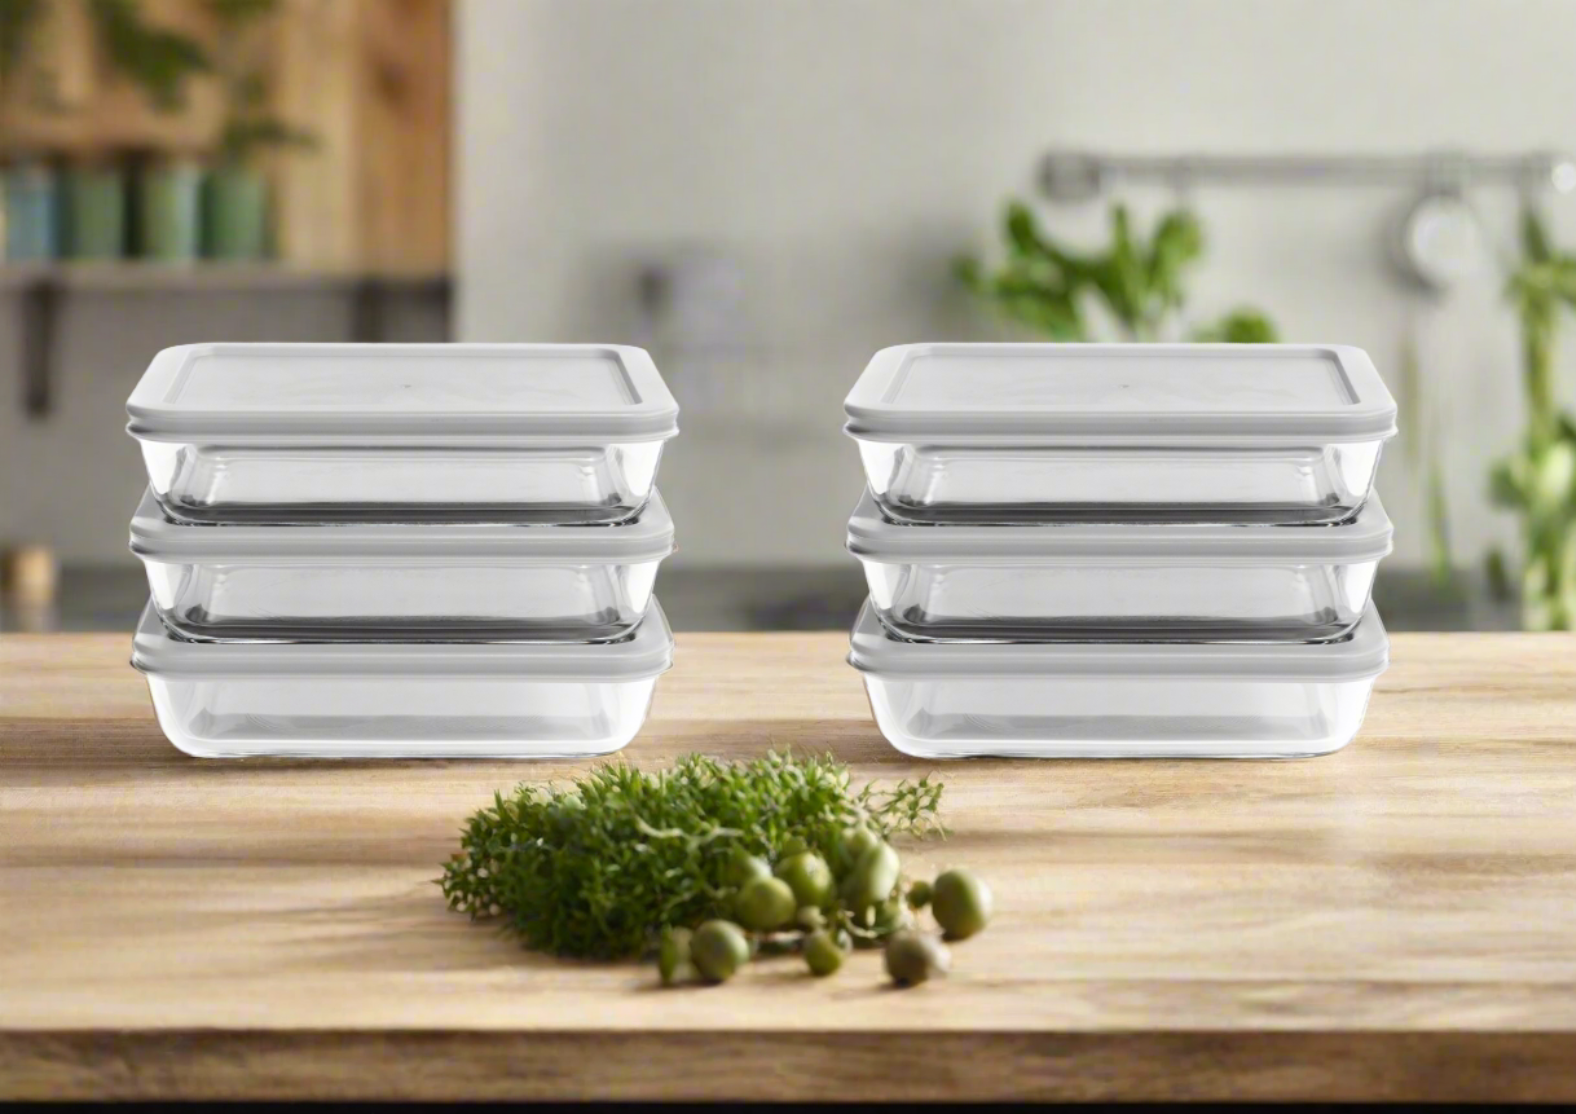 Glass Food Storage Containers - 12 Piece (6 Containers + 6 Lids) Rectangular Nesting Space-Saving Set